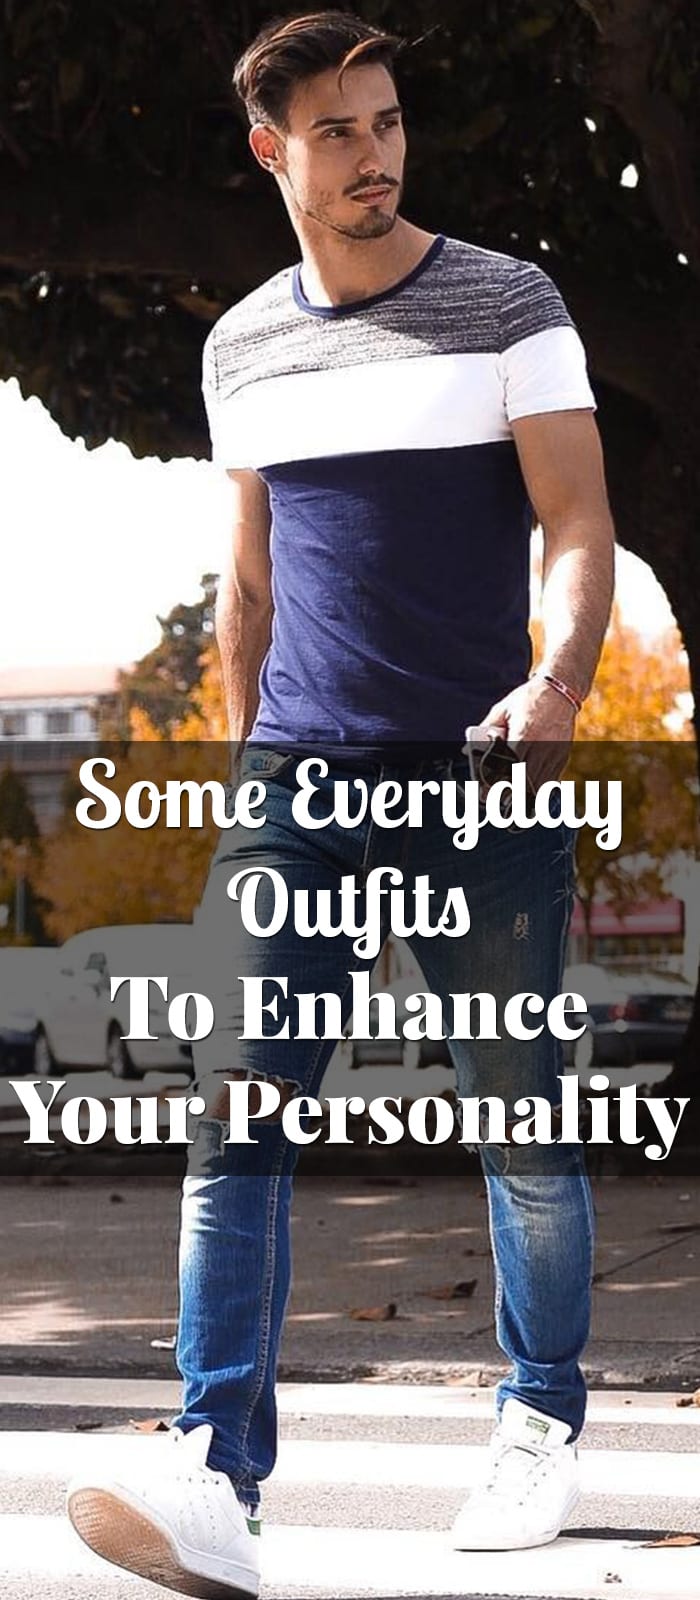 Some Everyday Outfits To Enhance Your Personality